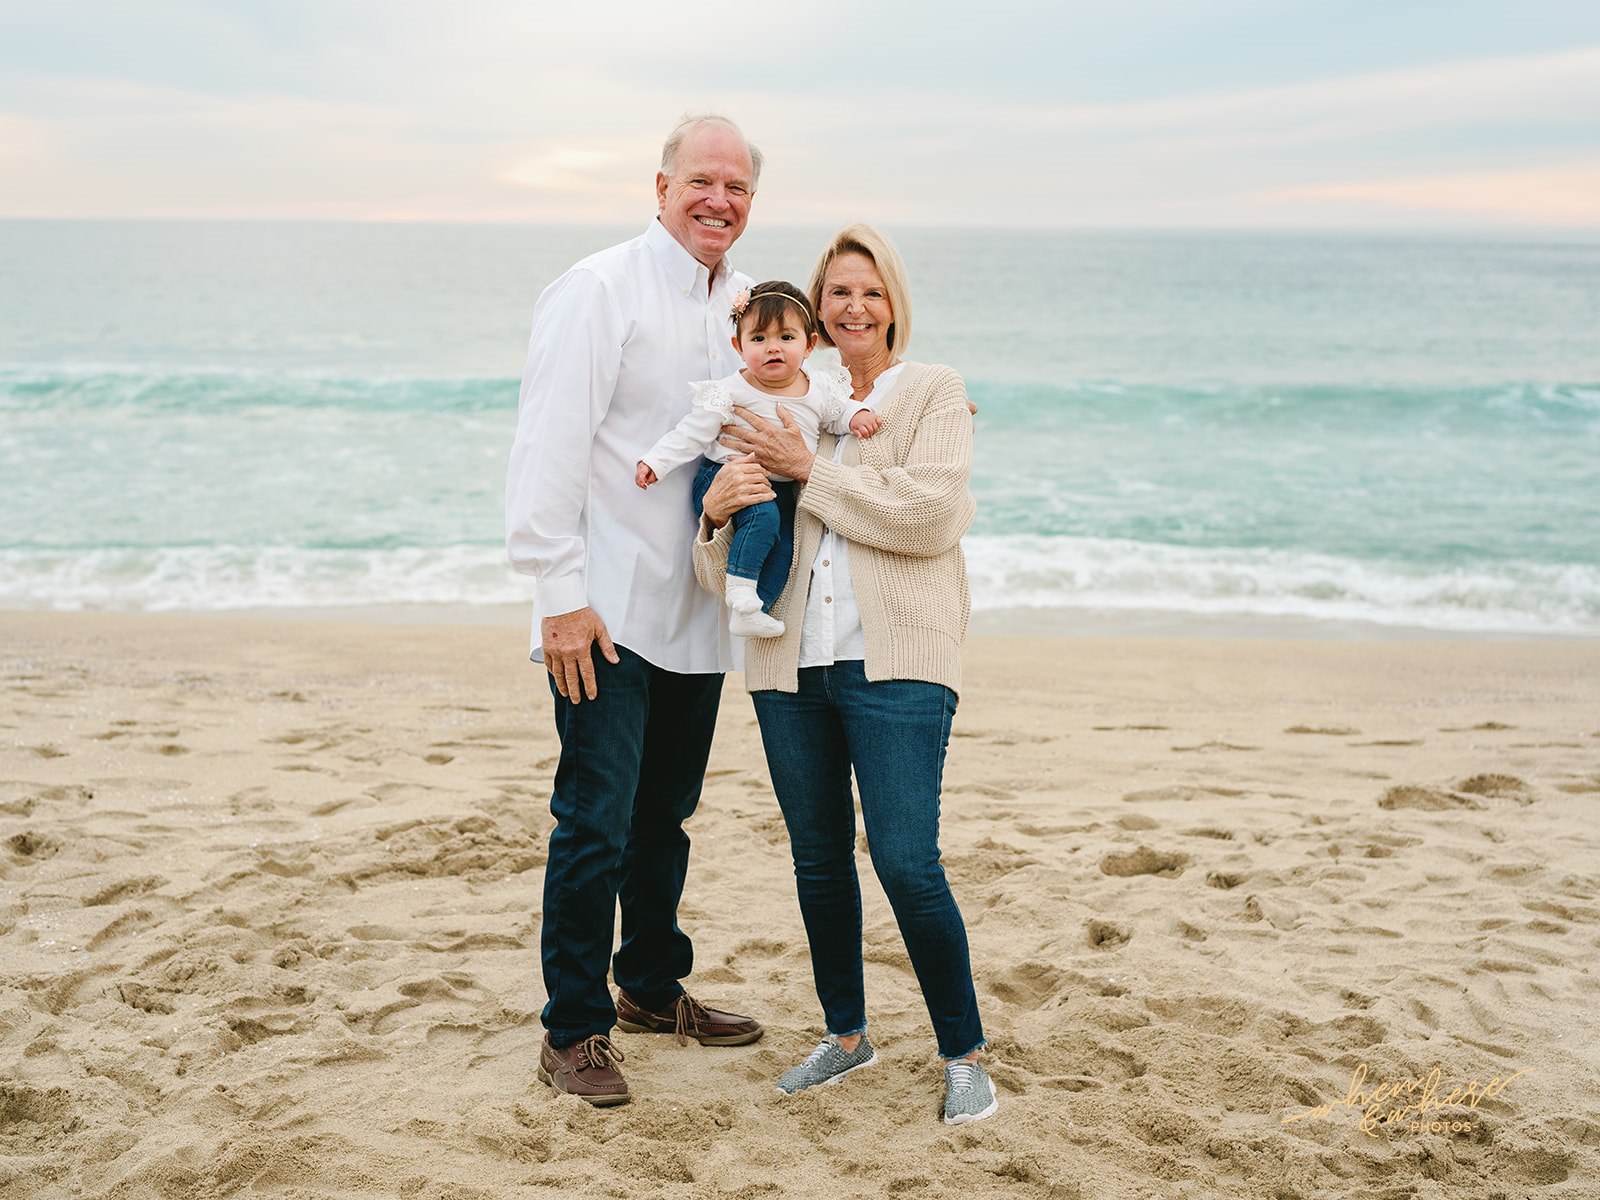 Family Portrait Session - Redondo Beach, California. Stacy reached out to me to document her family and her happy daughter. It's rare when you get a chance to work with such a happy baby. She had the biggest smile, even with dreary December clouds in Los Angeles.